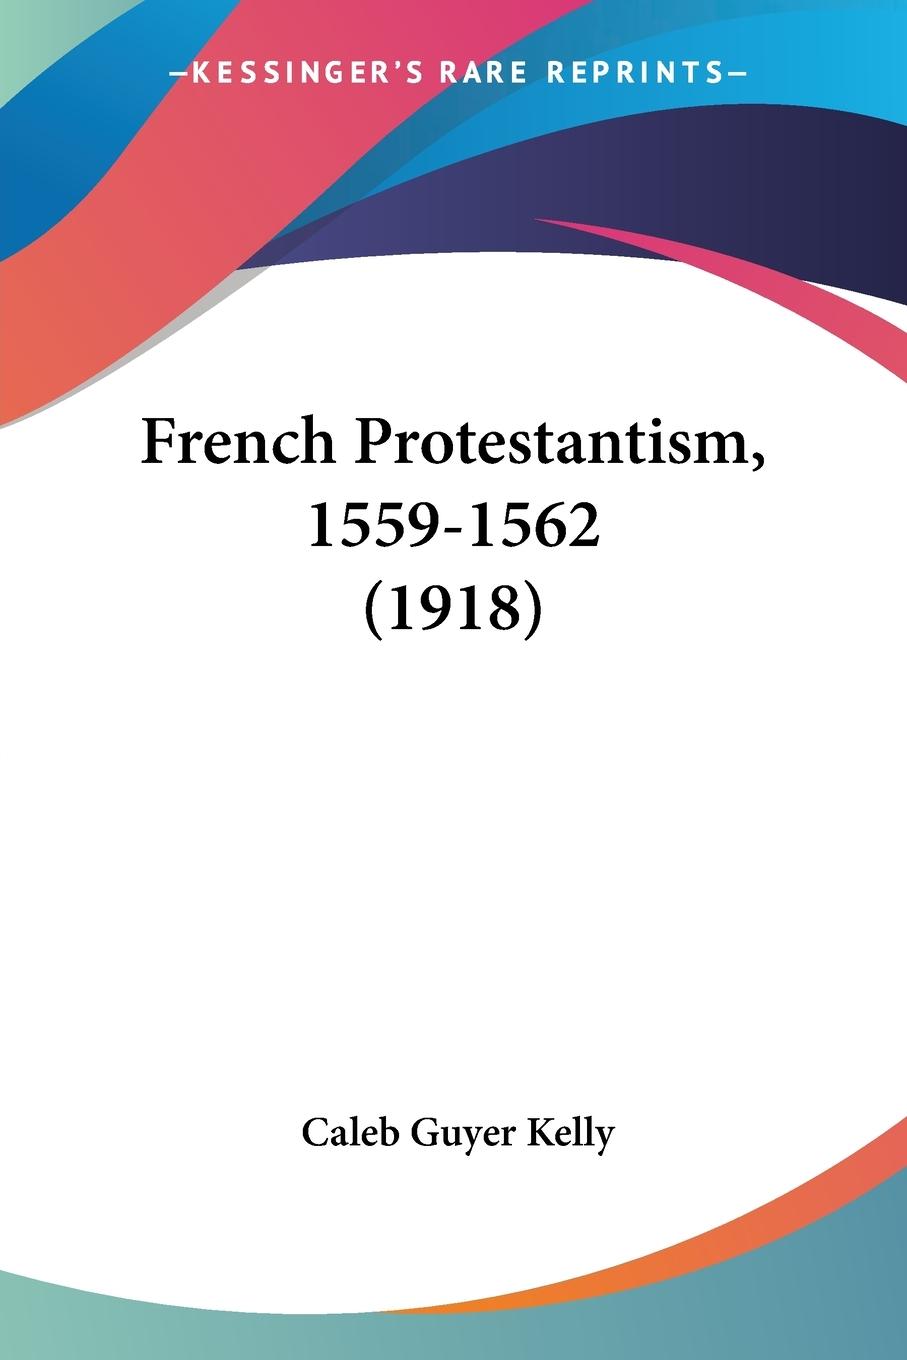 French Protestantism, 1559-1562 (1918) - Kelly, Caleb Guyer